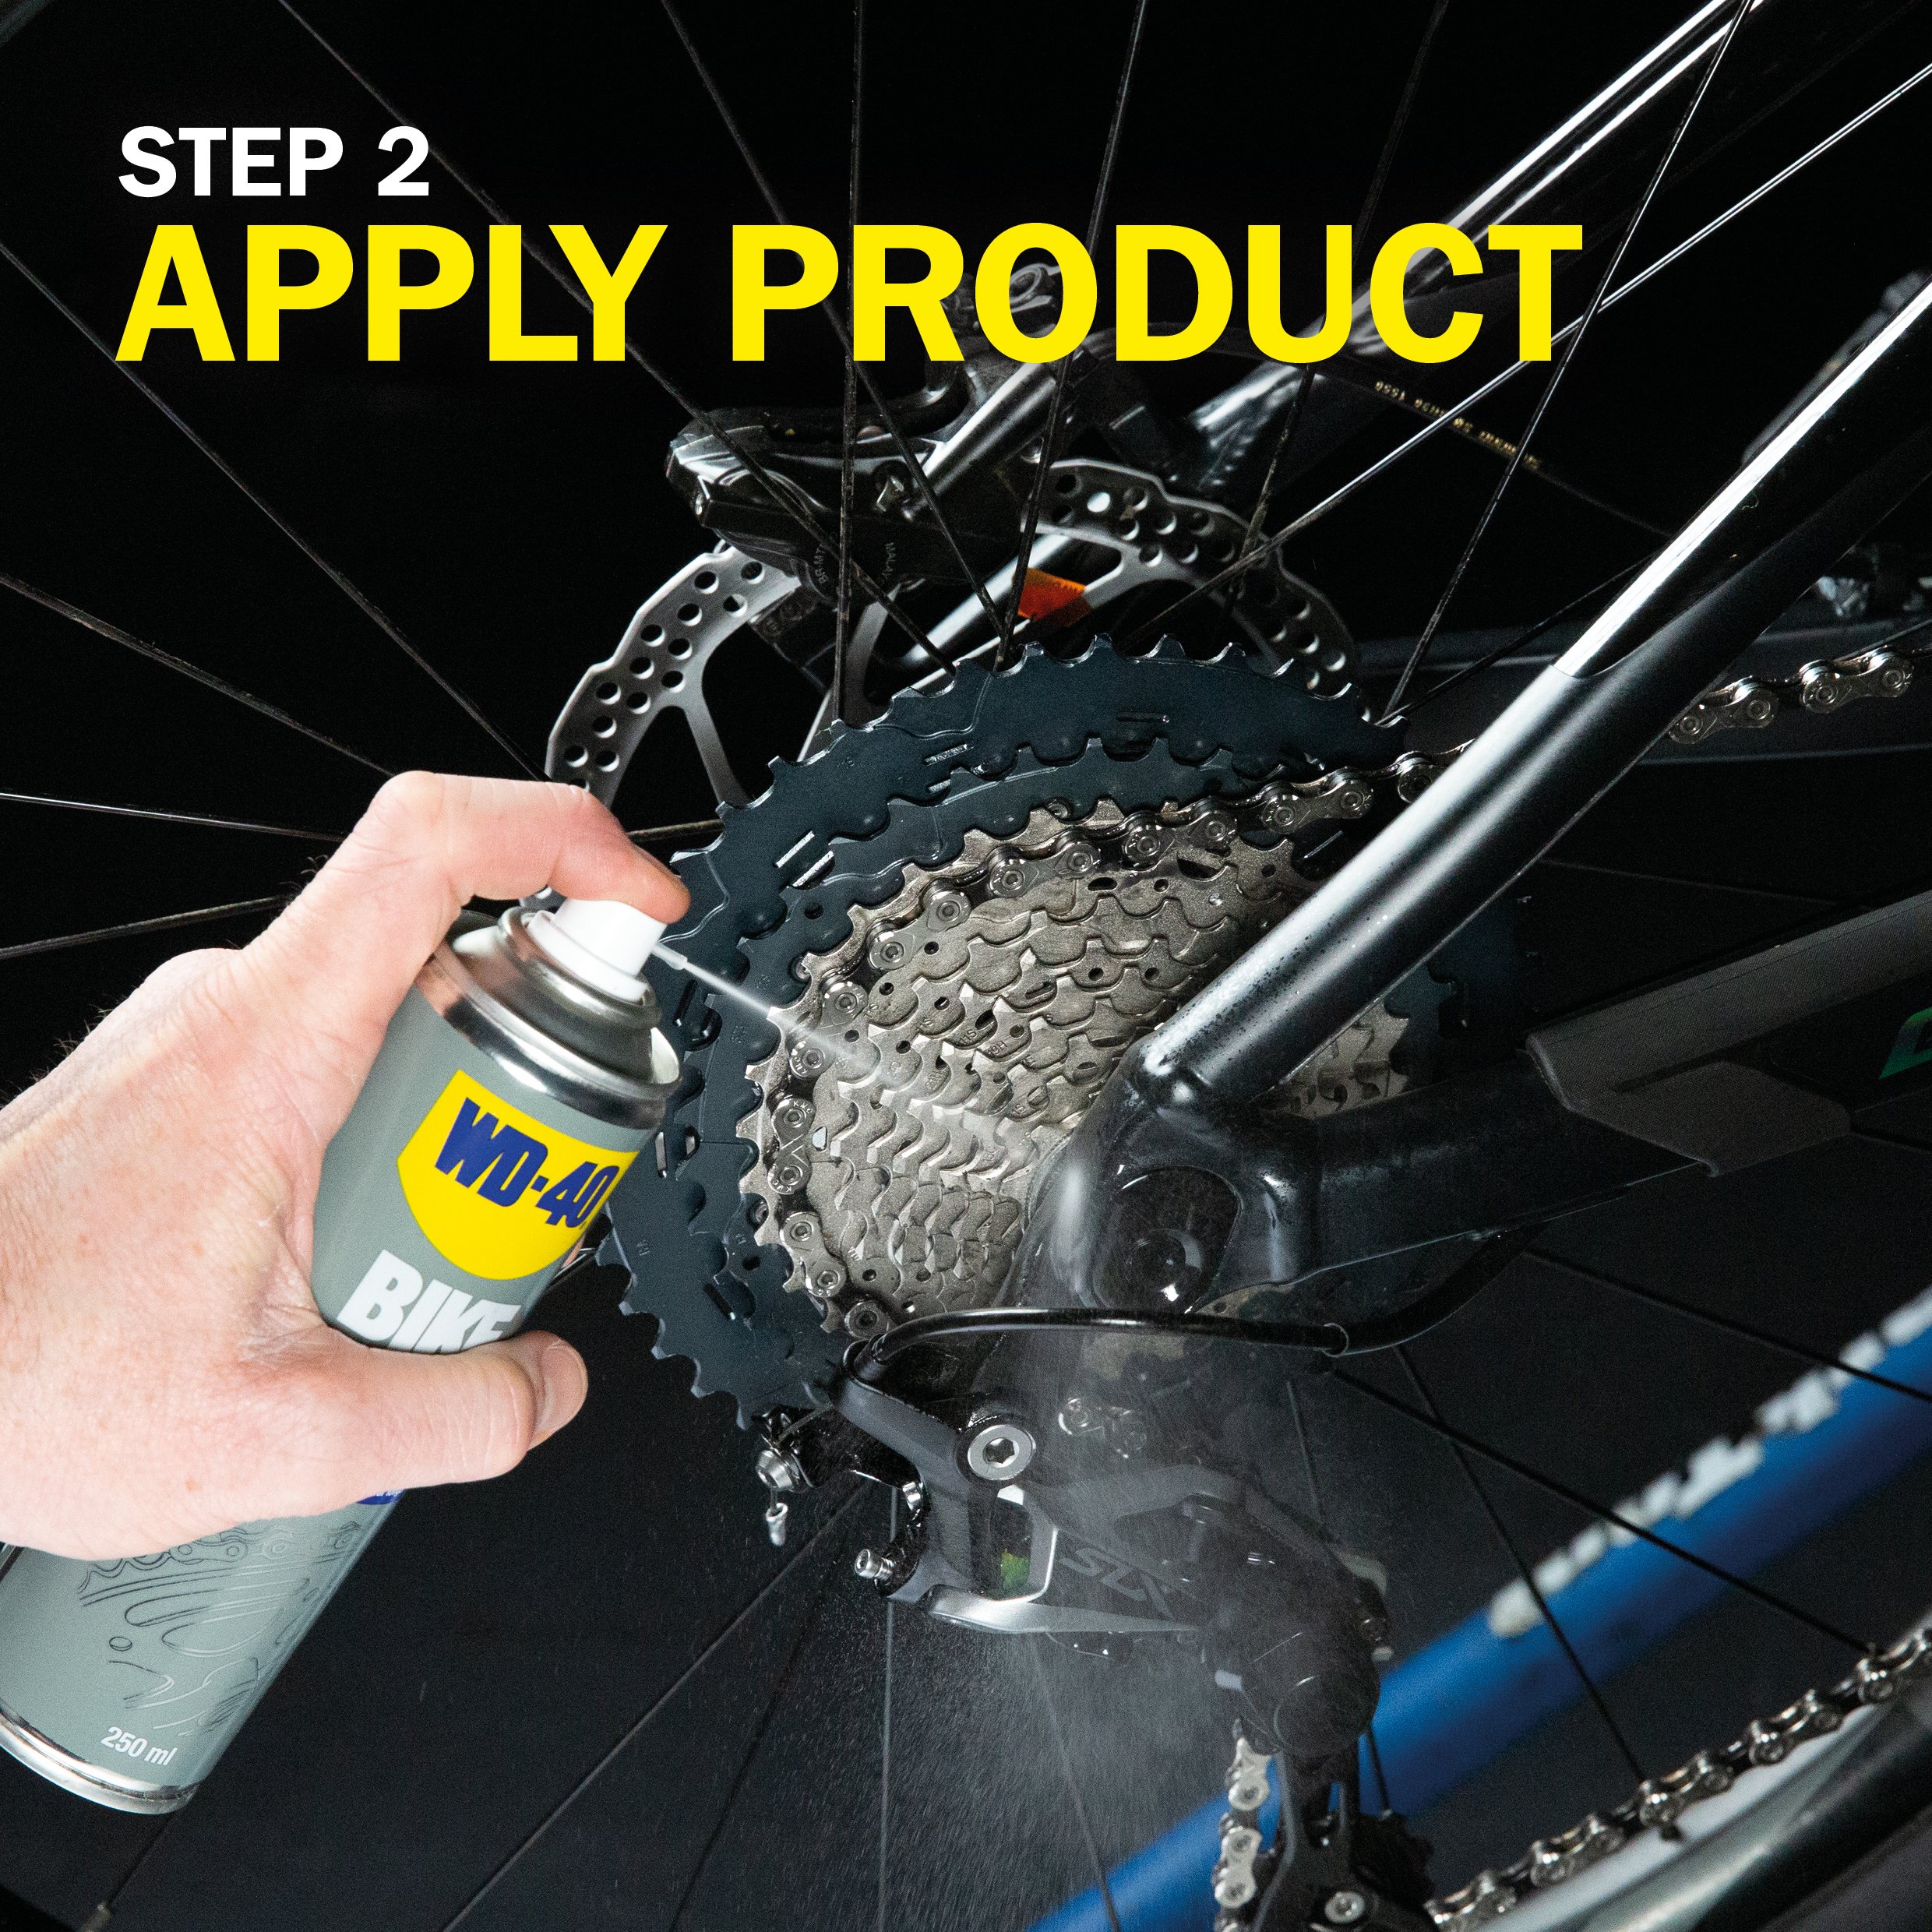 WD40_Bike_All_Conditions_Lube_How_To_Use_Part_4.jpg